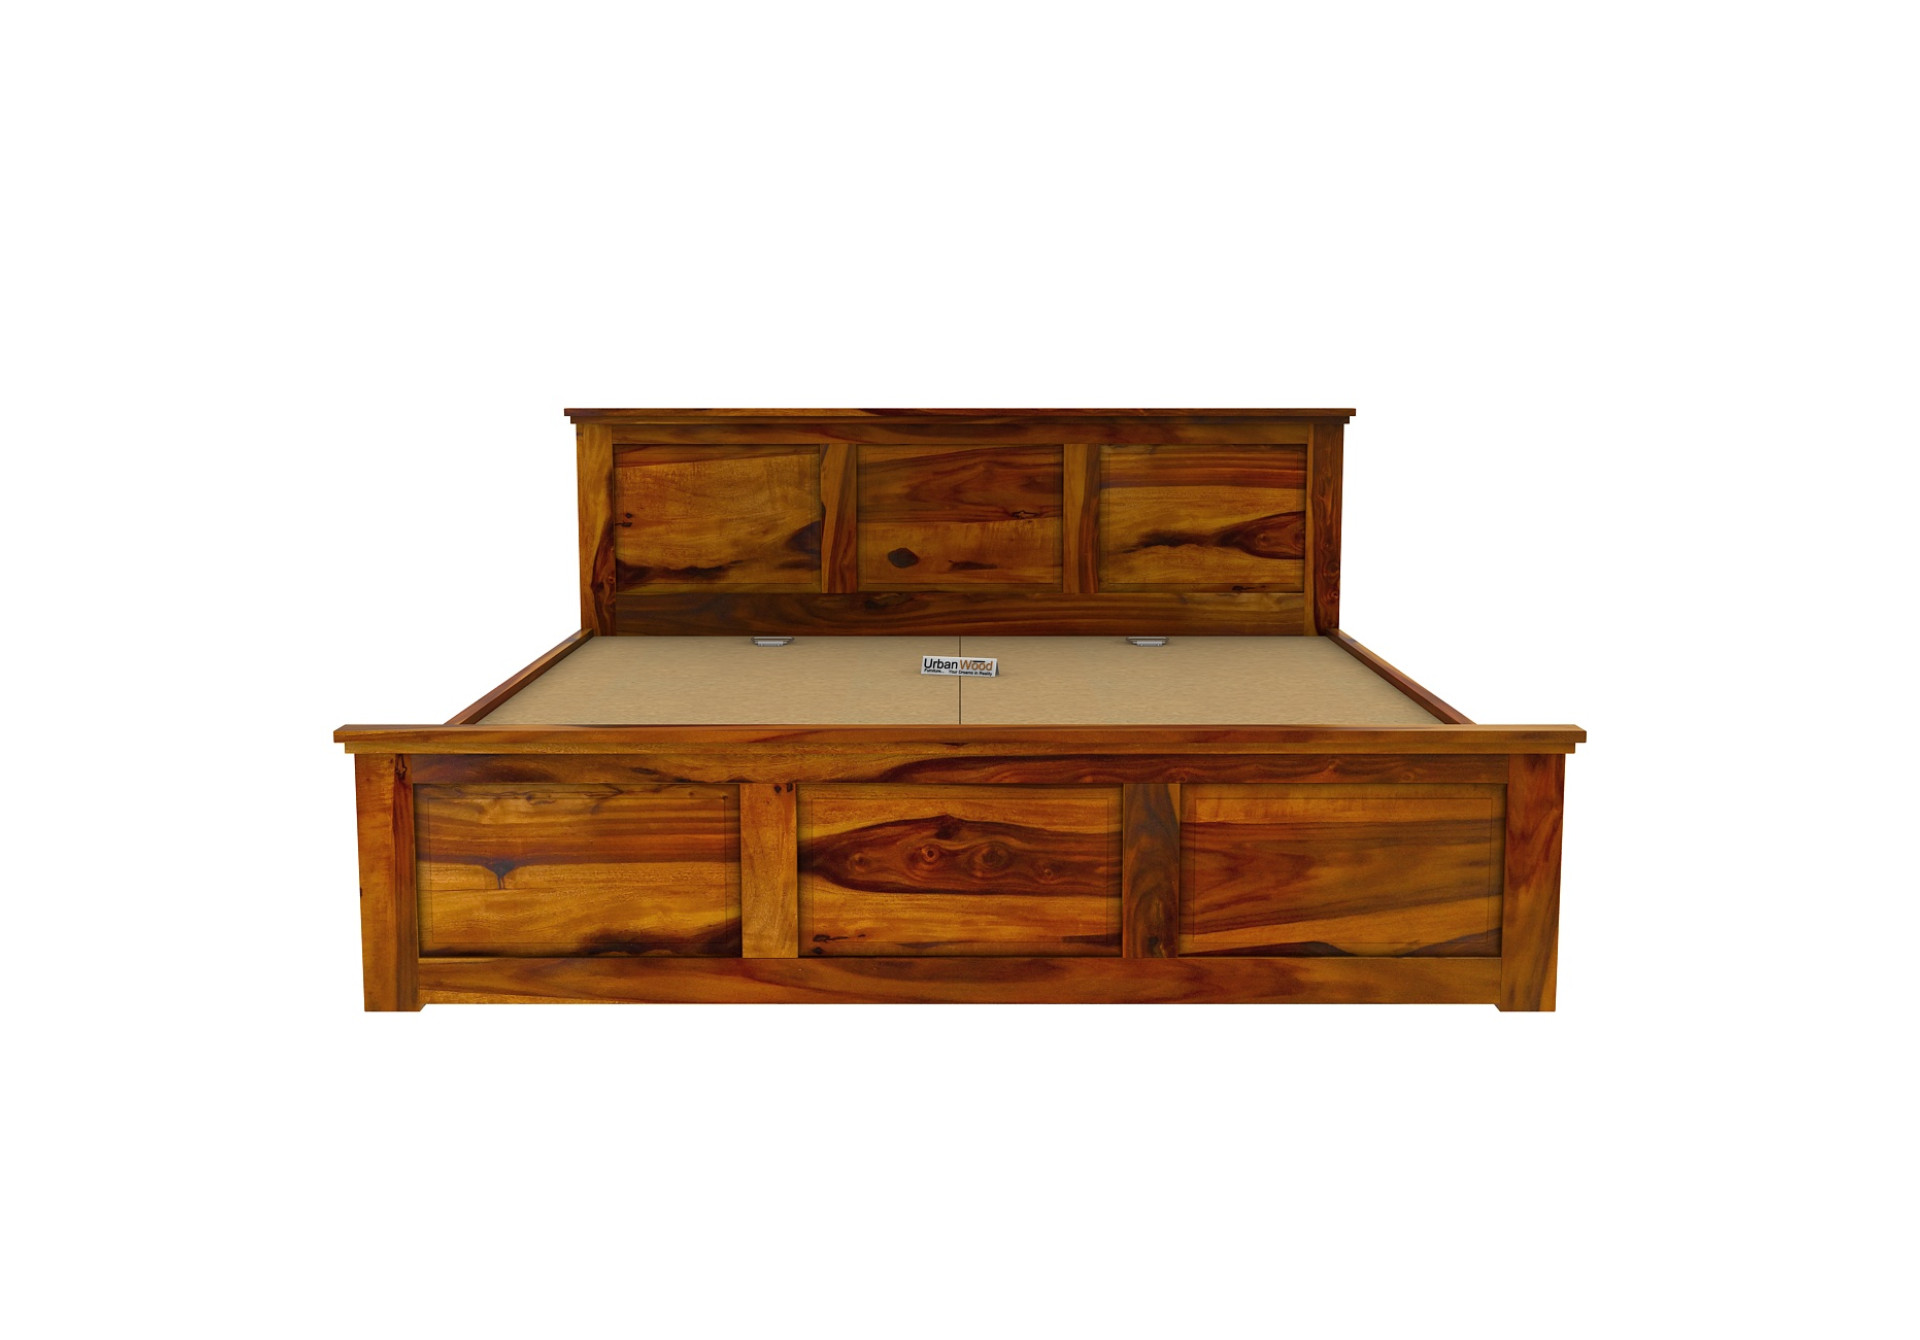 Babson Without Storage Bed (Queen Size, Honey Finish)